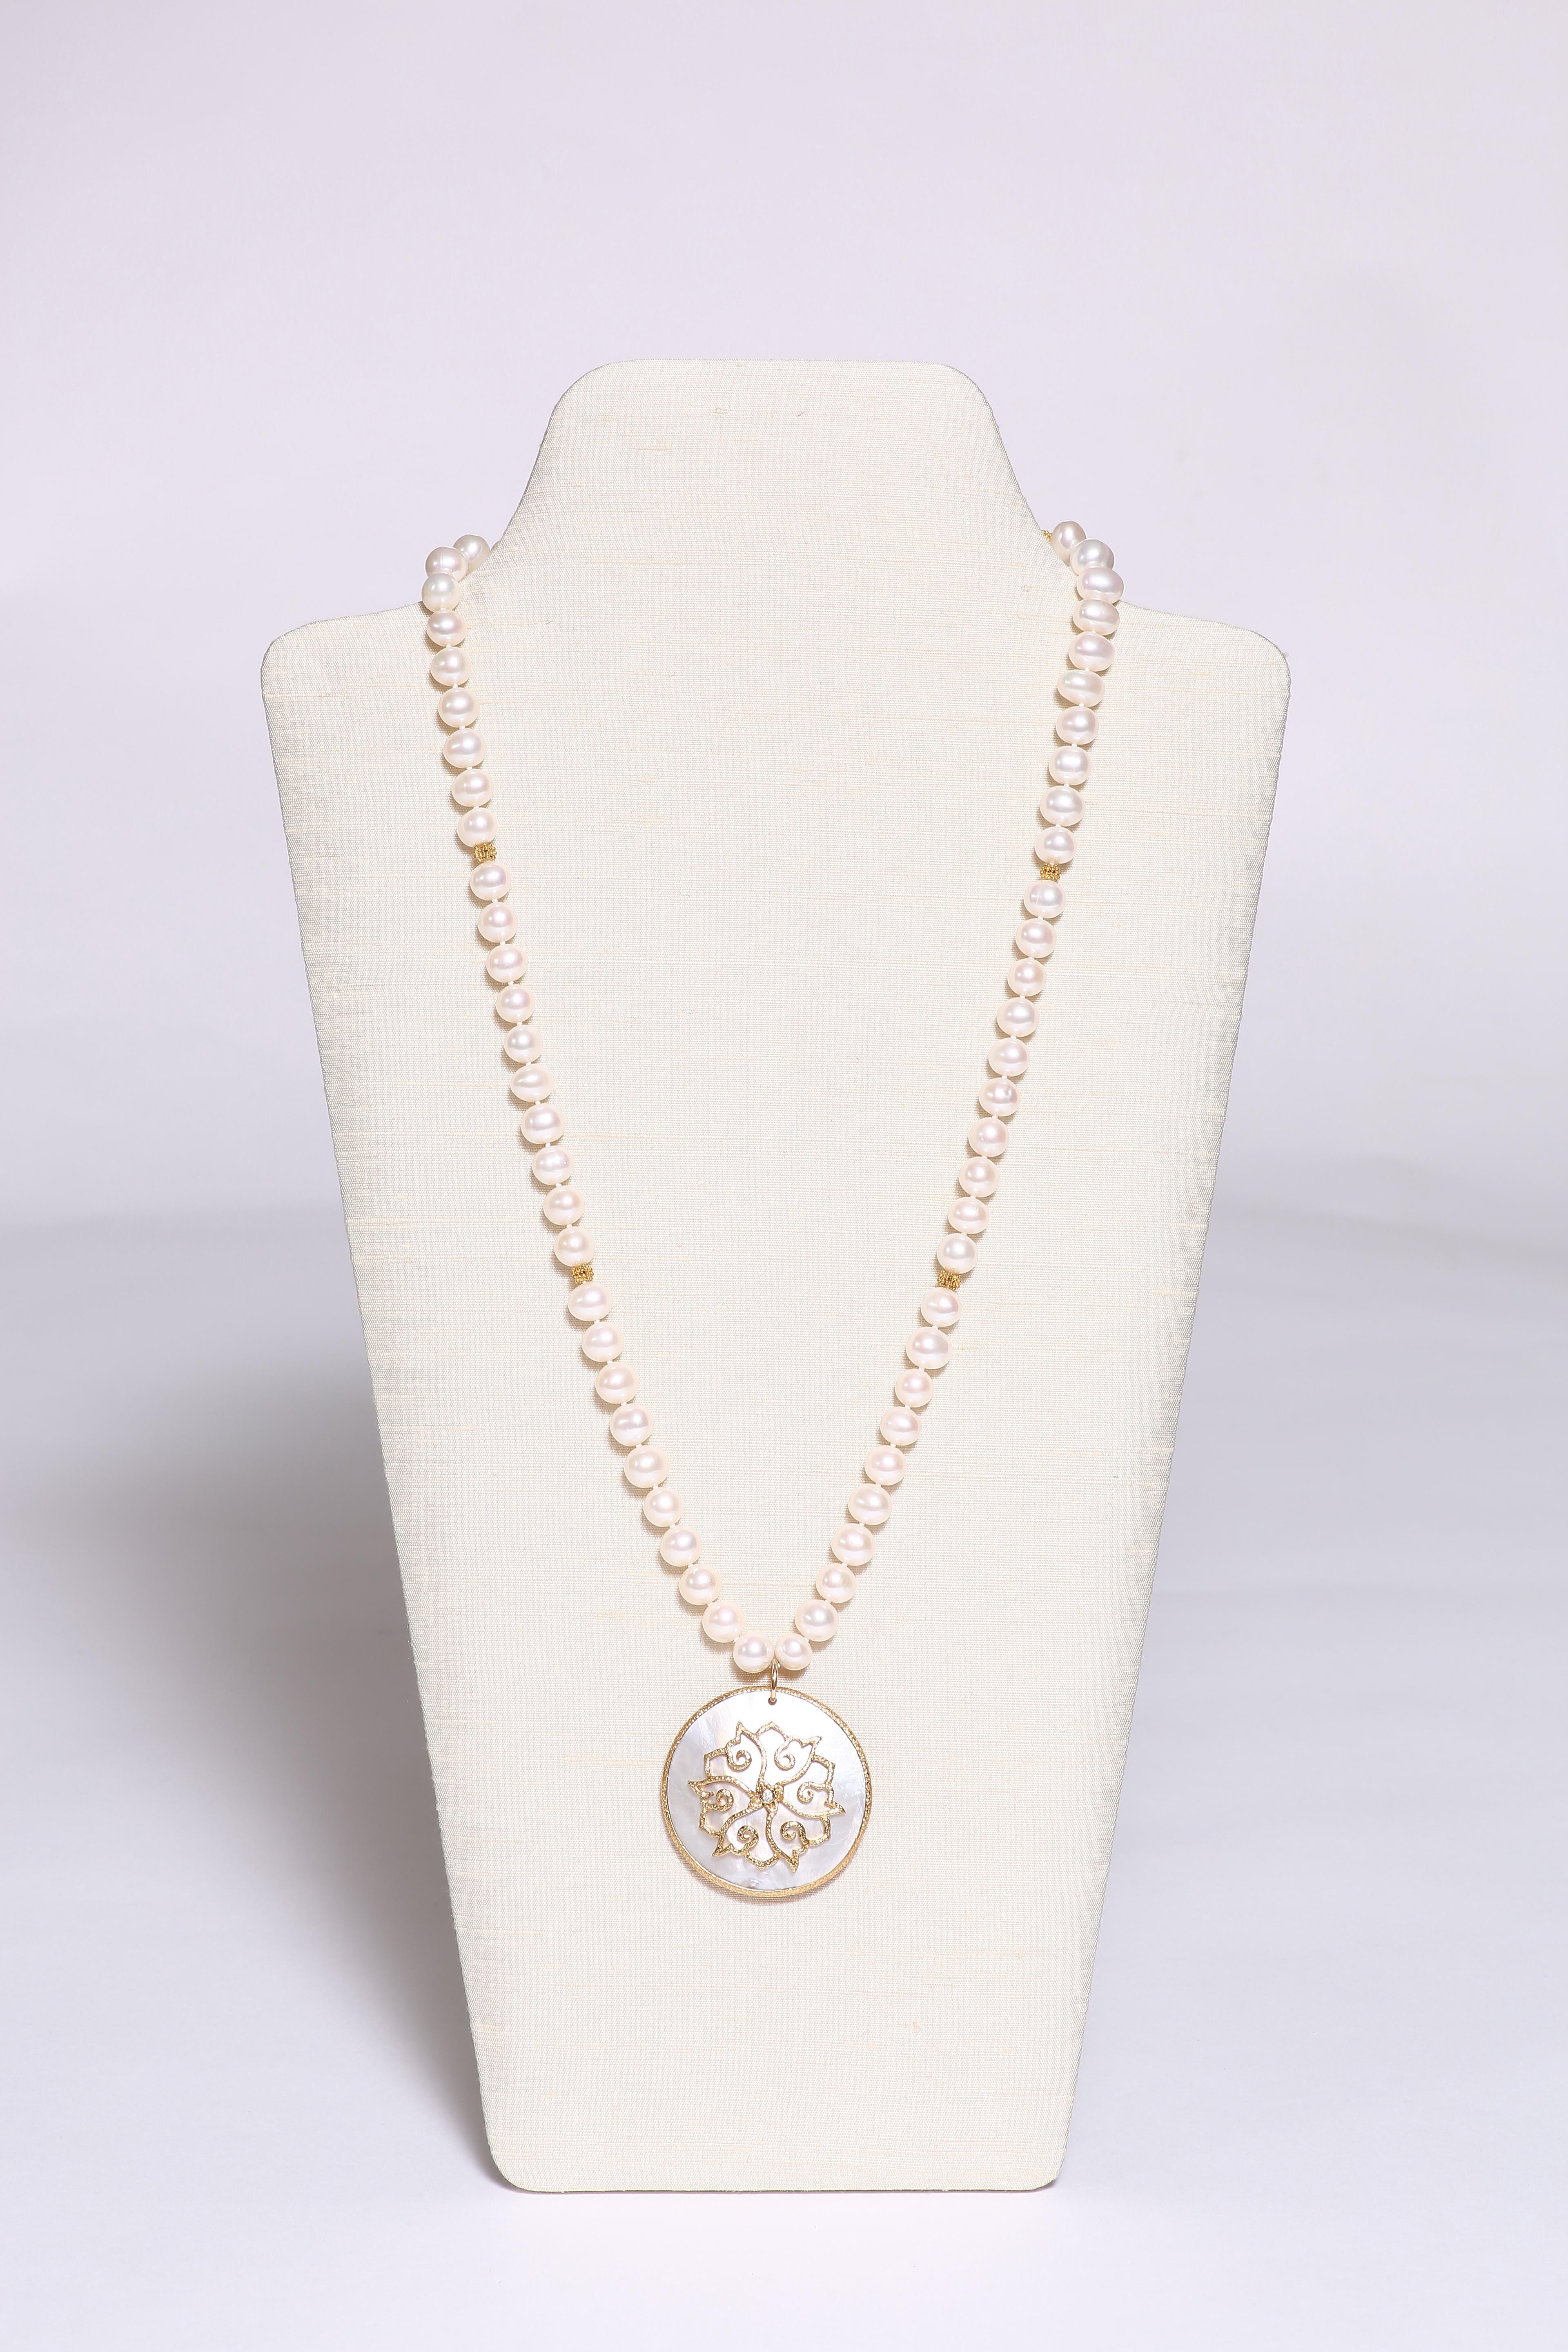 A beautiful Mother of Pearl pendant, decorated with hand-worked 18k gold lotus and a diamond studded in the center. Freshwater pearls form the necklace with six small 18k faceted gold beads and a sphere-shaped clasp.